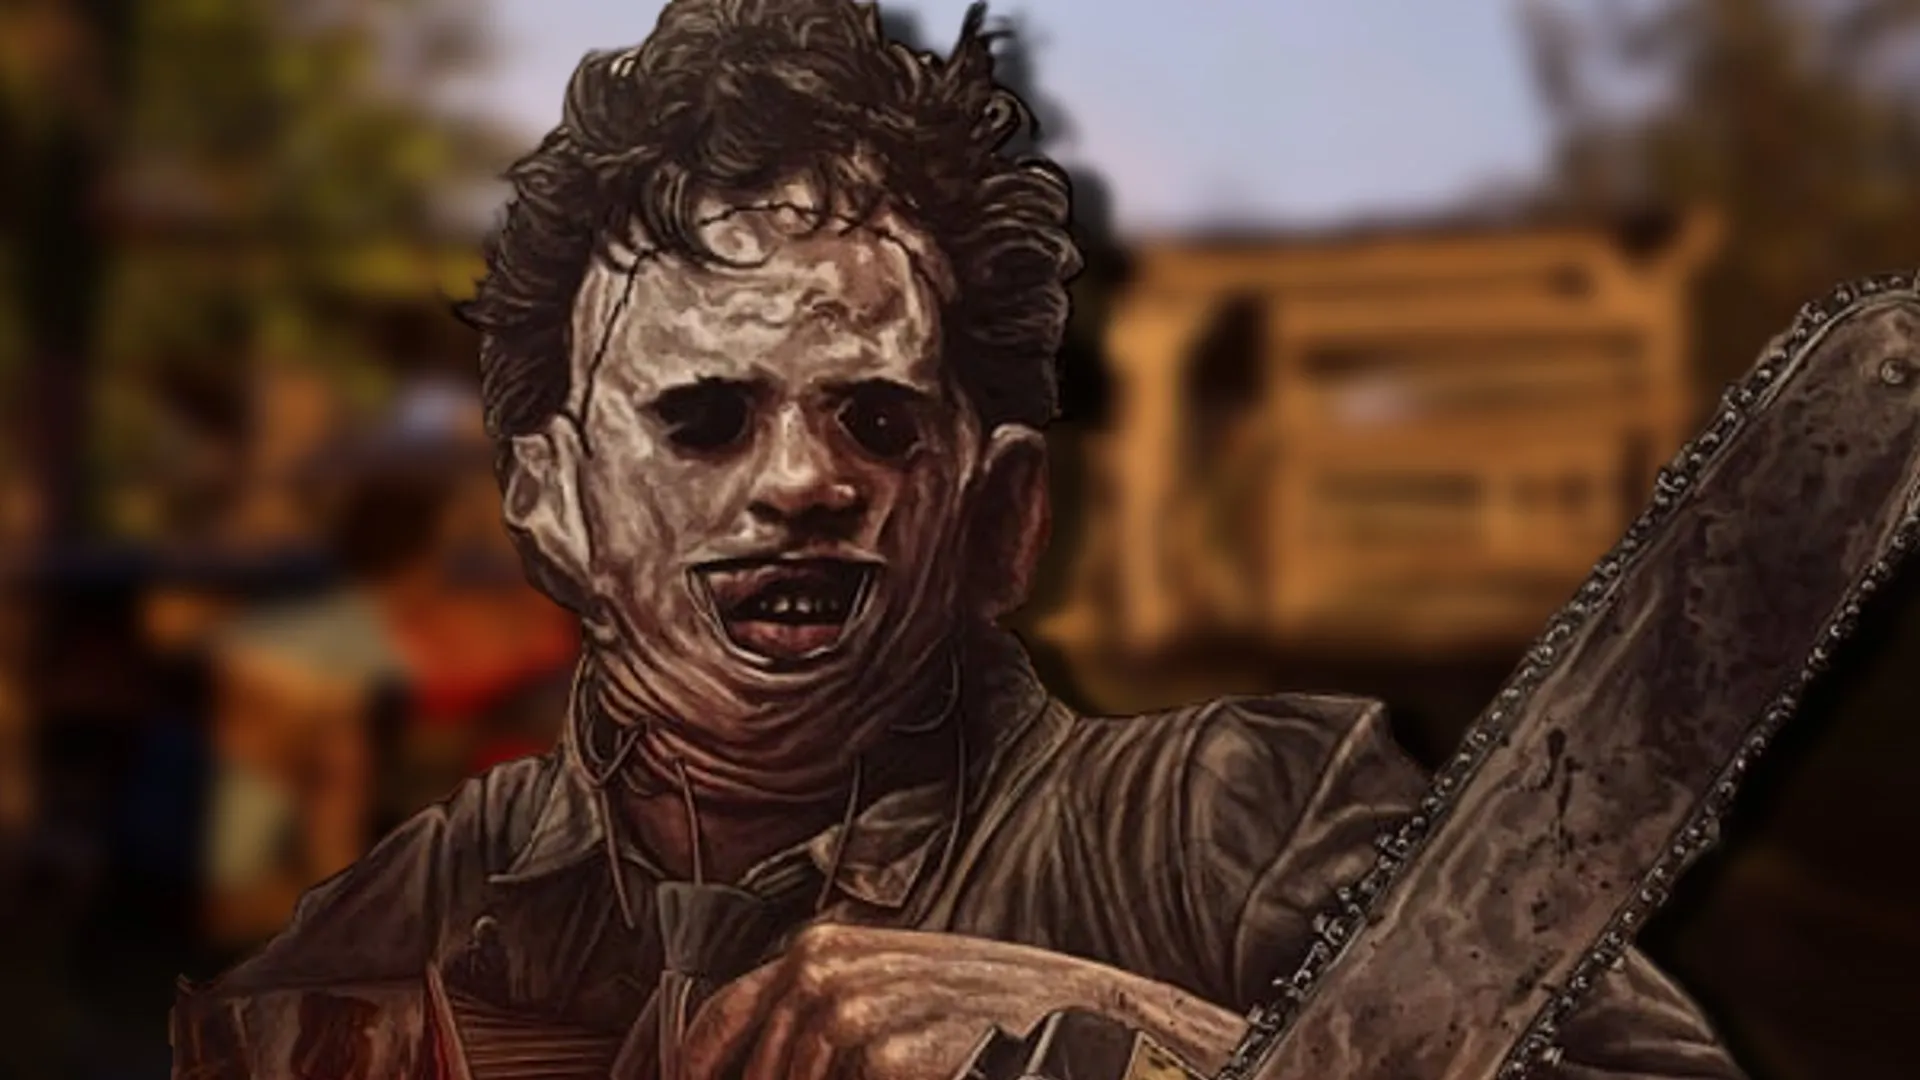 Is The Texas Chain Saw Massacre Crossplay? Answered